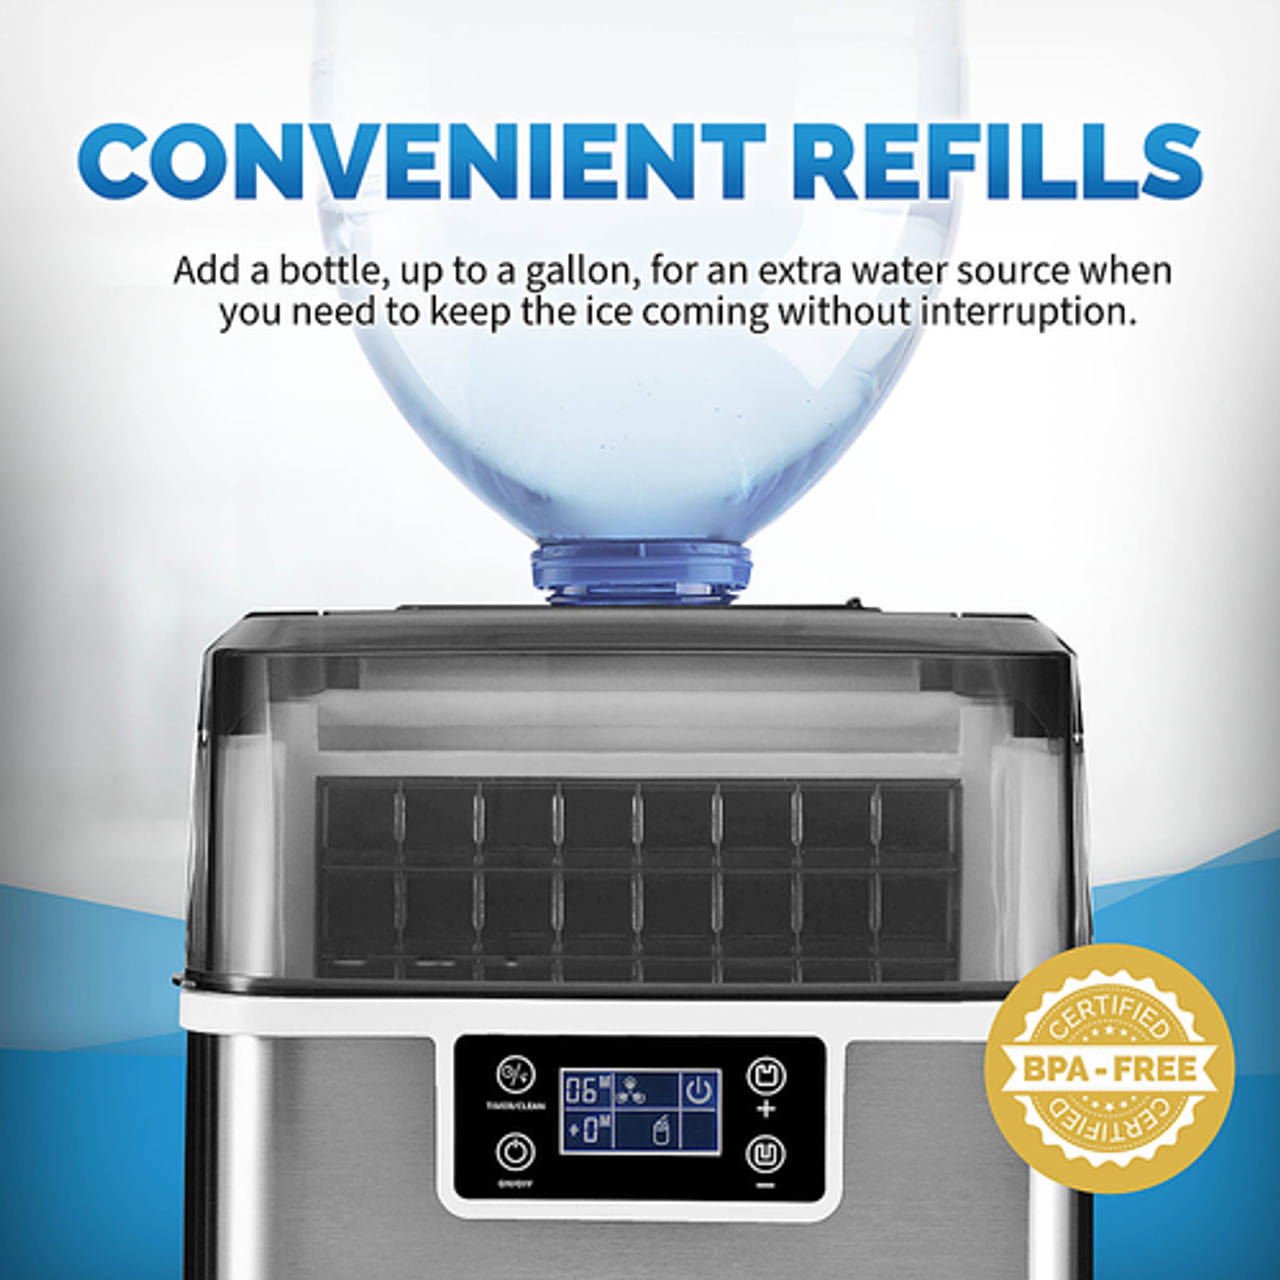 NewAir - 45 lbs. Portable Countertop Clear Ice Maker with  FrozenFall Technology - Stainless steel